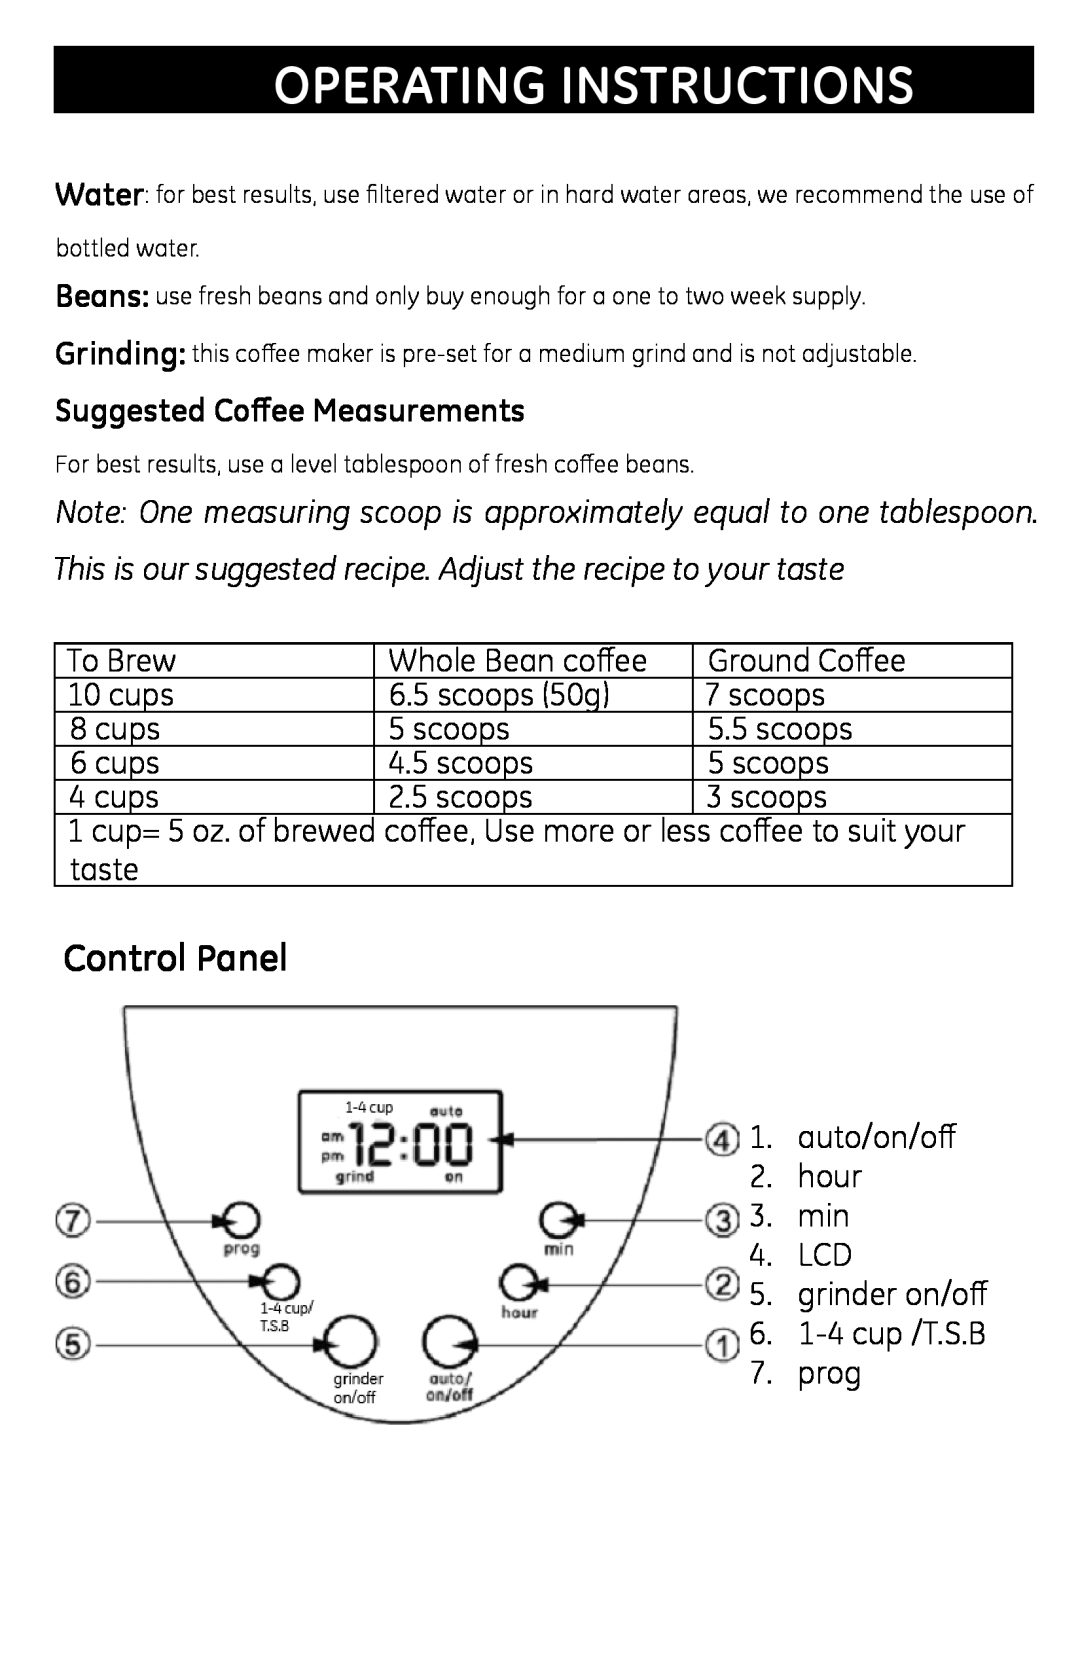 GE 681131691031 manual Operating Instructions, Control Panel, Suggested Coffee Measurements 